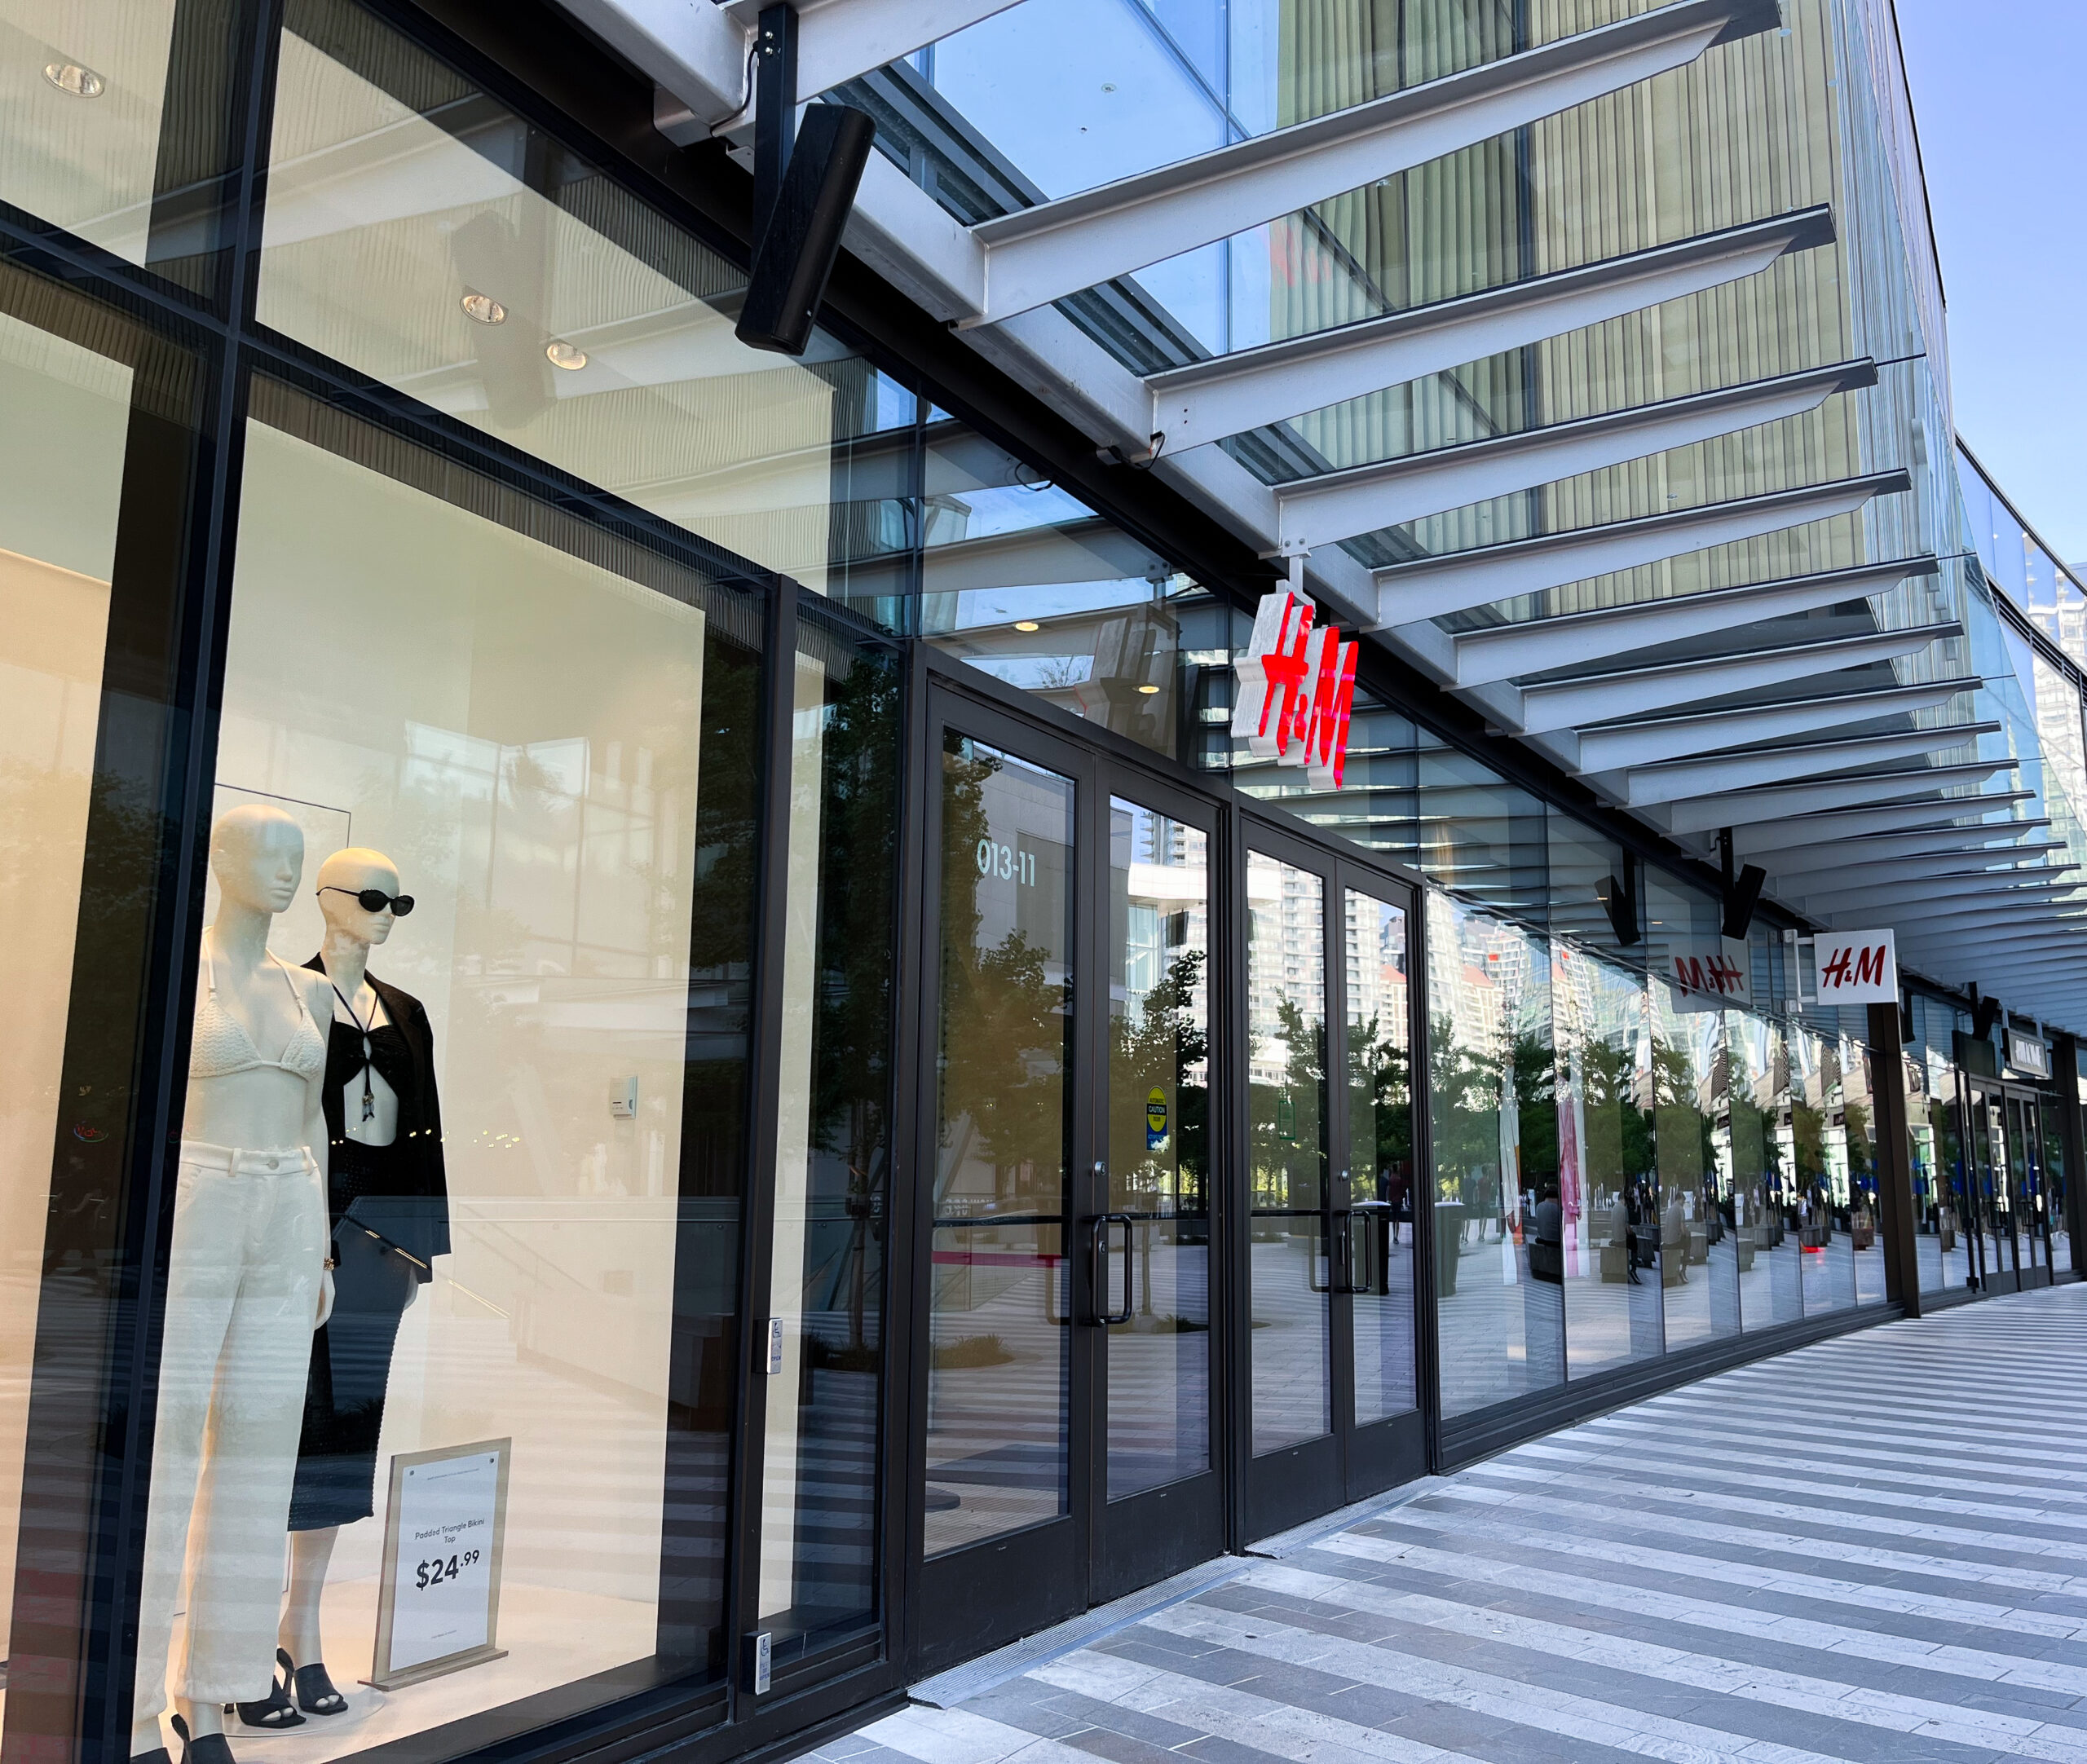 A modern-looking storefront exterior of H&M on a bright day. The display window features mannequins dressed in black and white monochrome outfits.